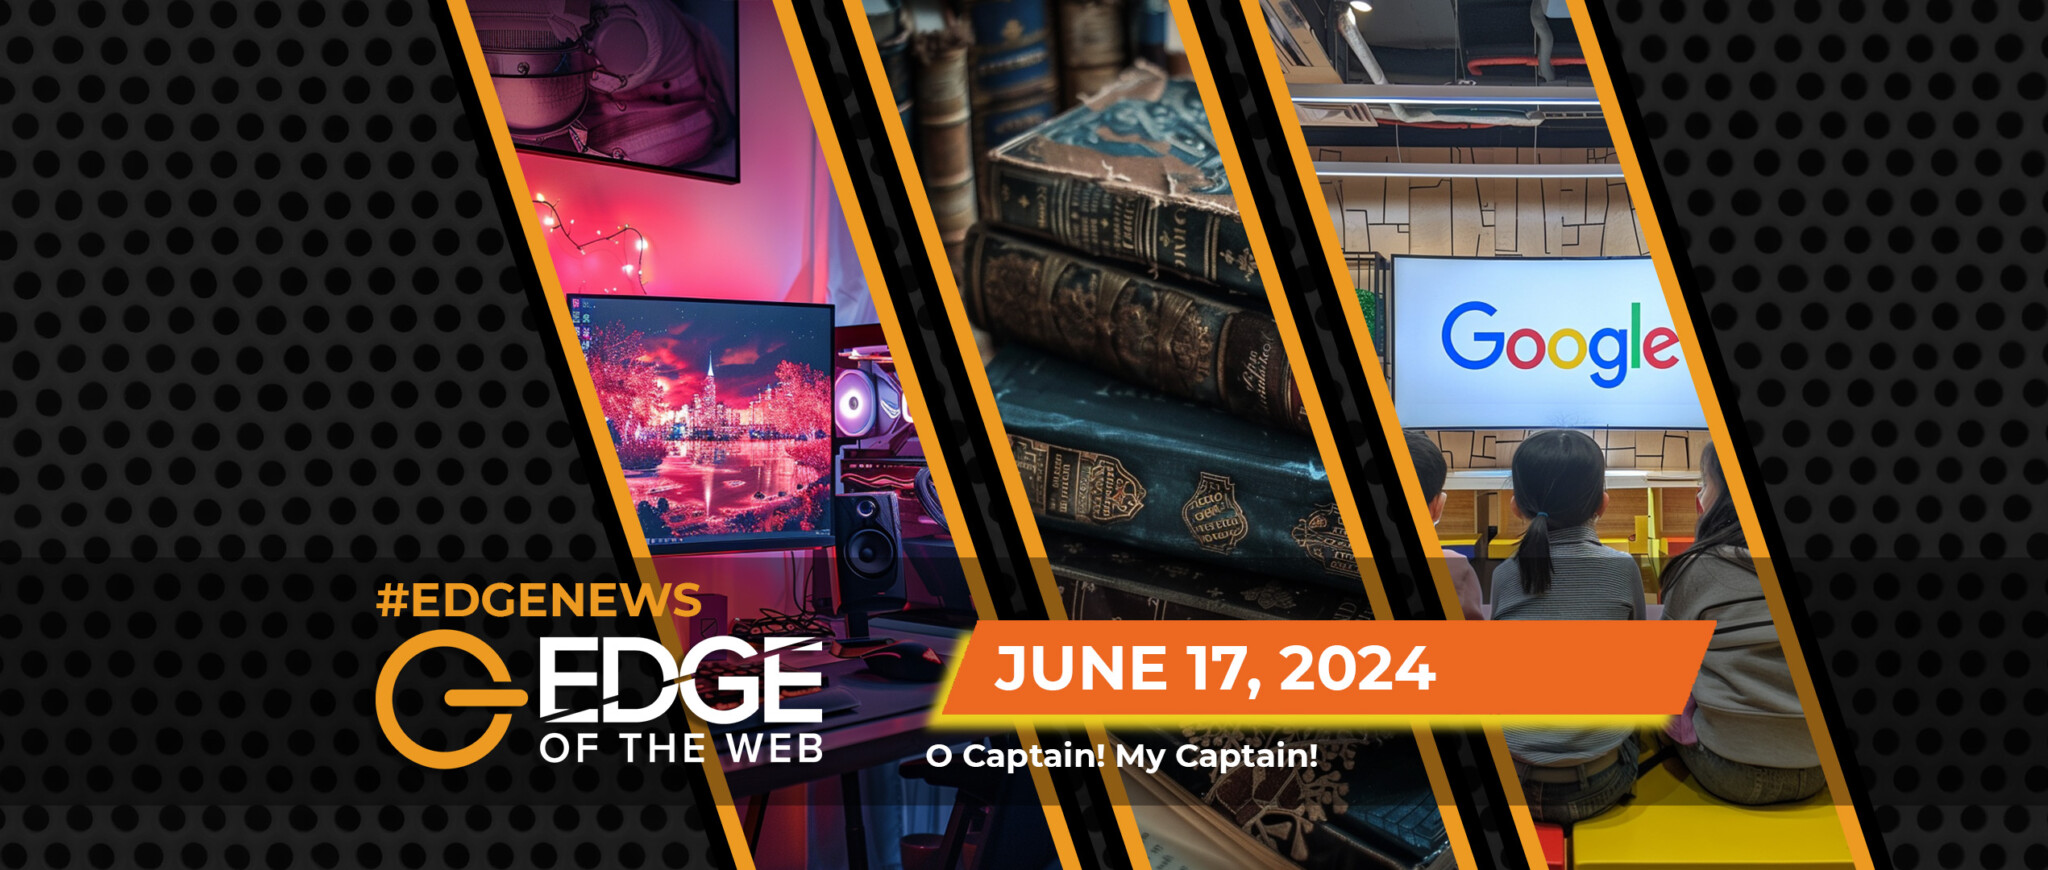 693 | News from the EDGE | Week of 6.17.2024